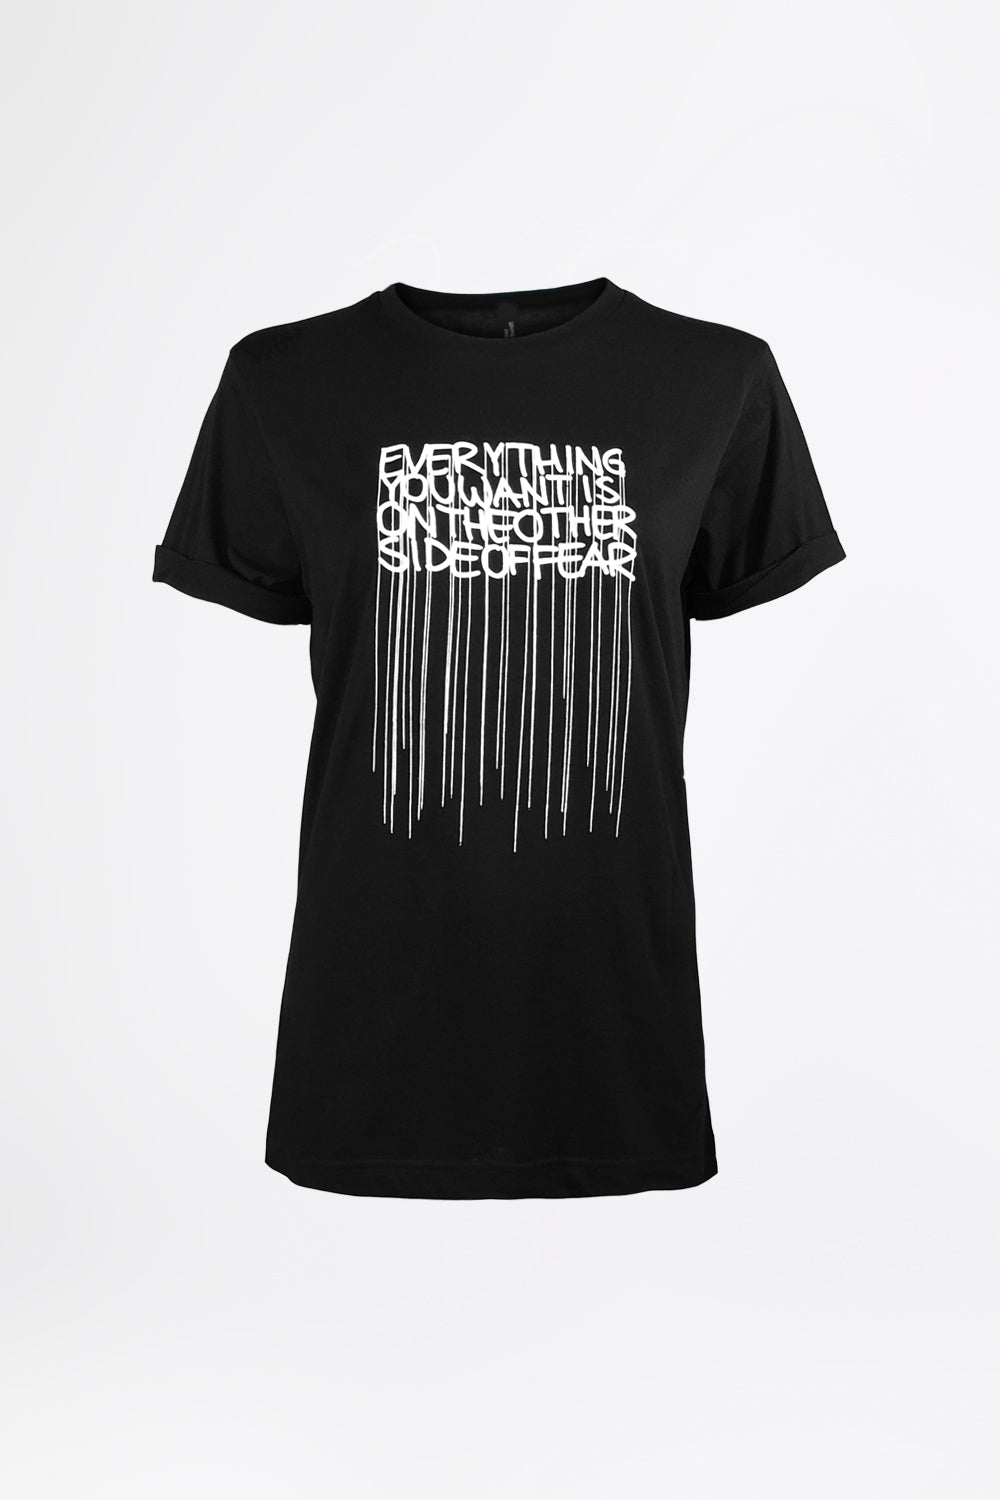 OTHER SIDE OF FEAR - Statement T-Shirt